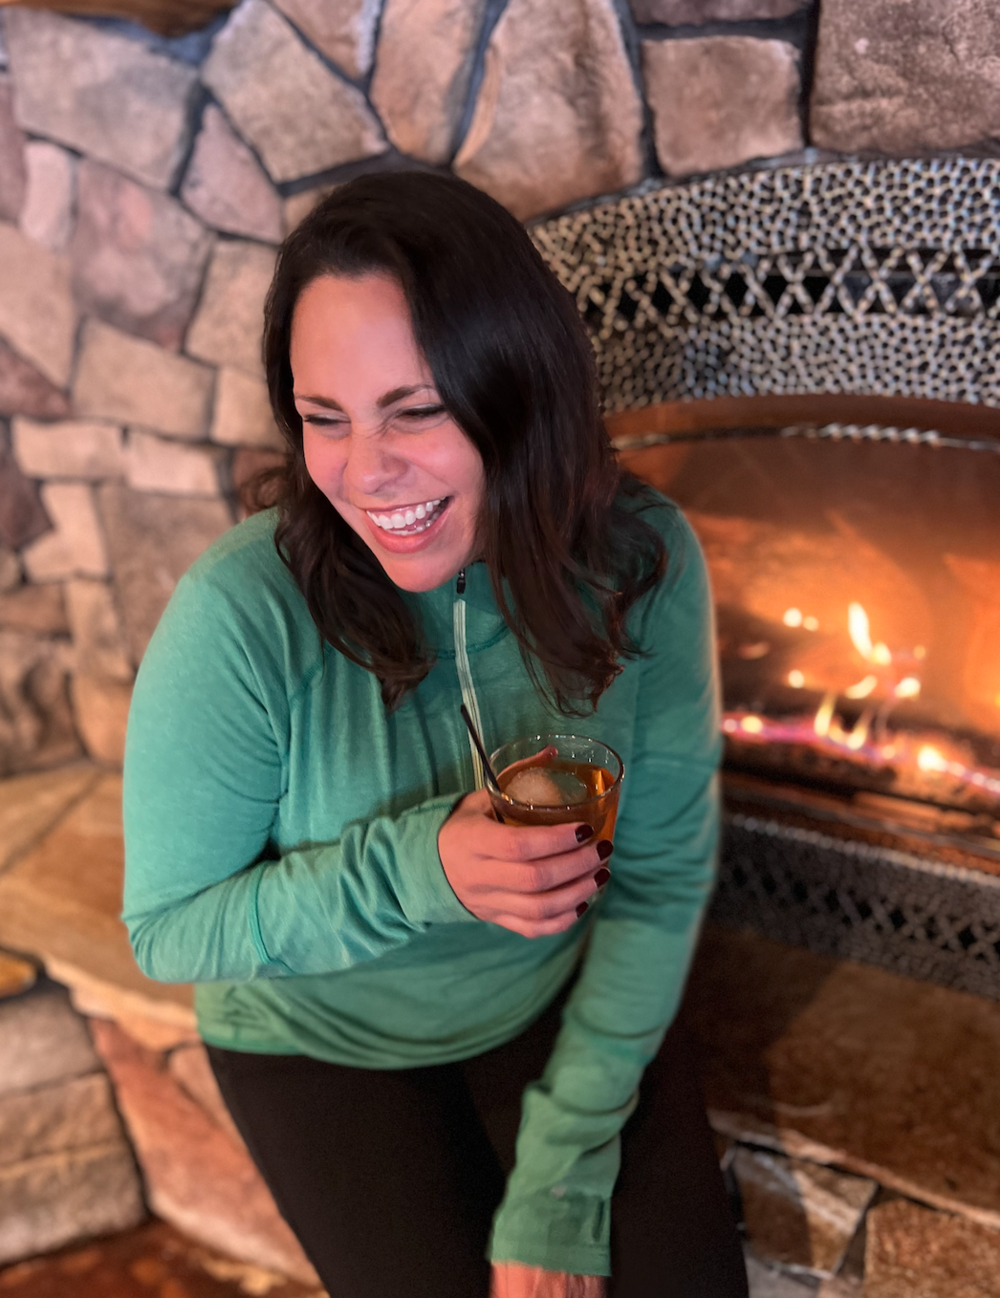 Woman Laughs at a Fireplace Holding a Cocktail